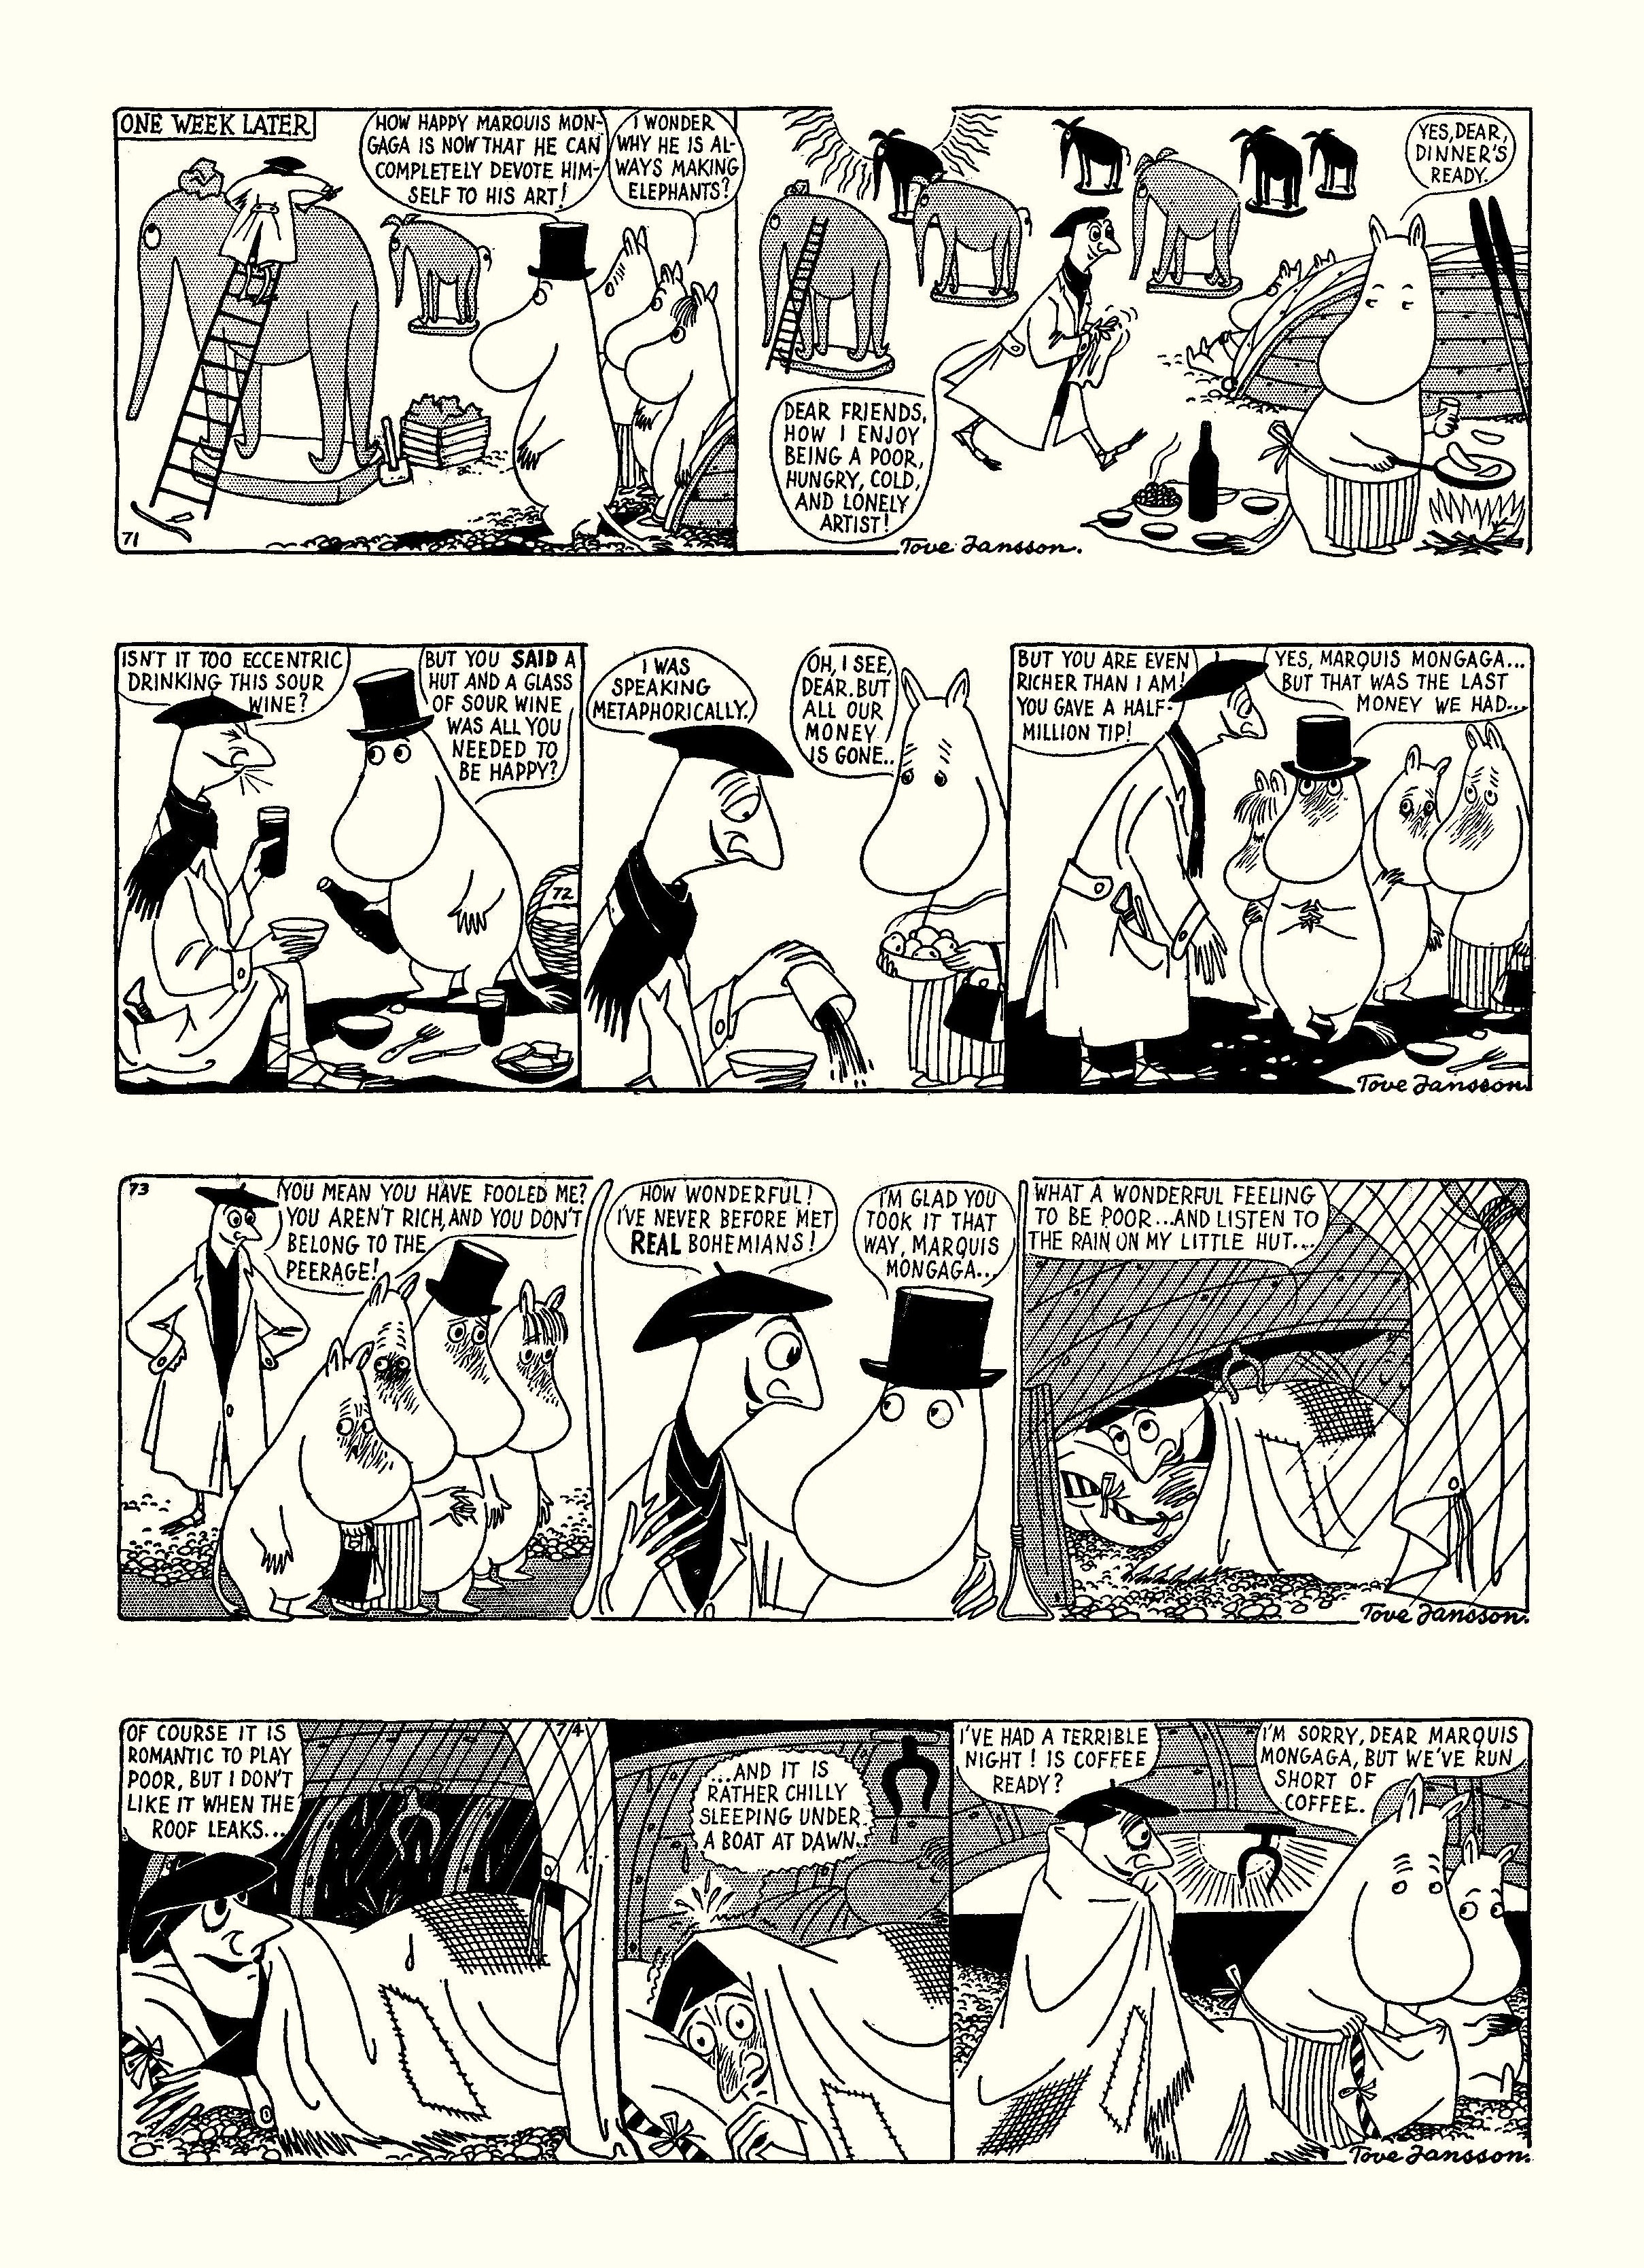 Read online Moomin: The Complete Tove Jansson Comic Strip comic -  Issue # TPB 1 - 66